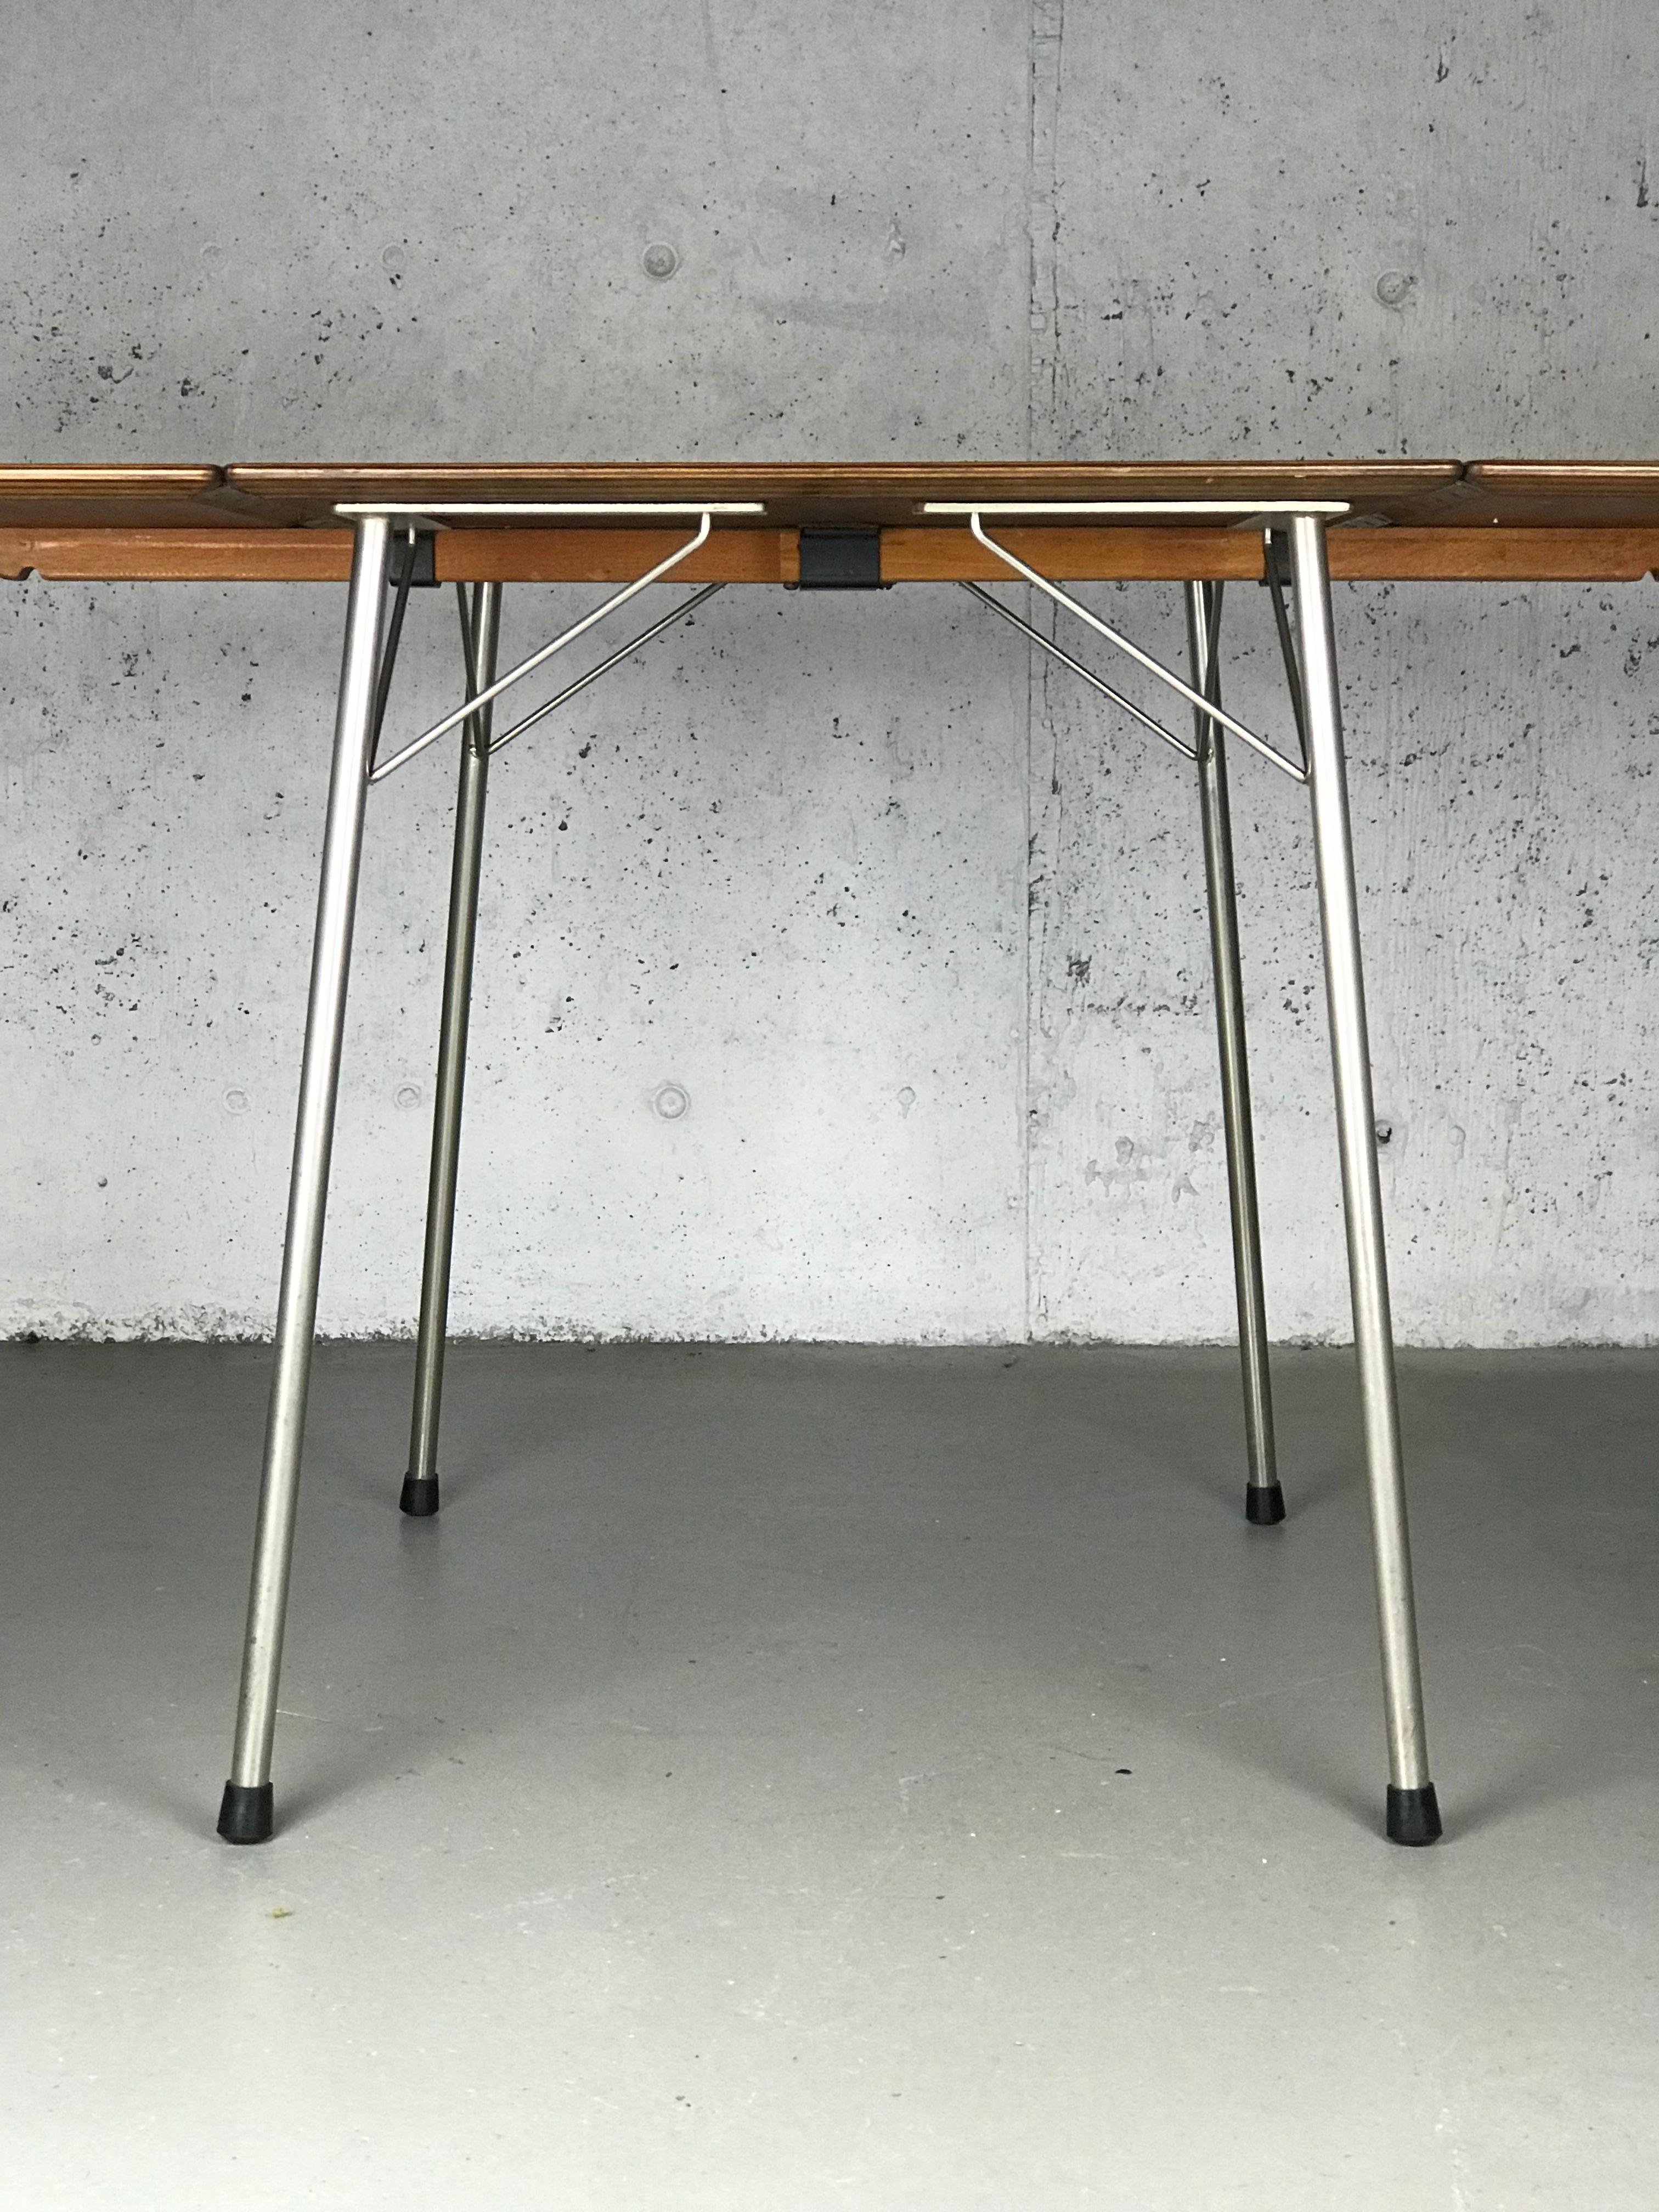 Minimalist drop-leaf dining table in teak and steel designed by Arne Jacobsen for Fritz Hansen, 1950s. The top has been refinished using Danish oil. The steel legs have been cleaned and yet show minor wear. 

With the leaves down the table is: